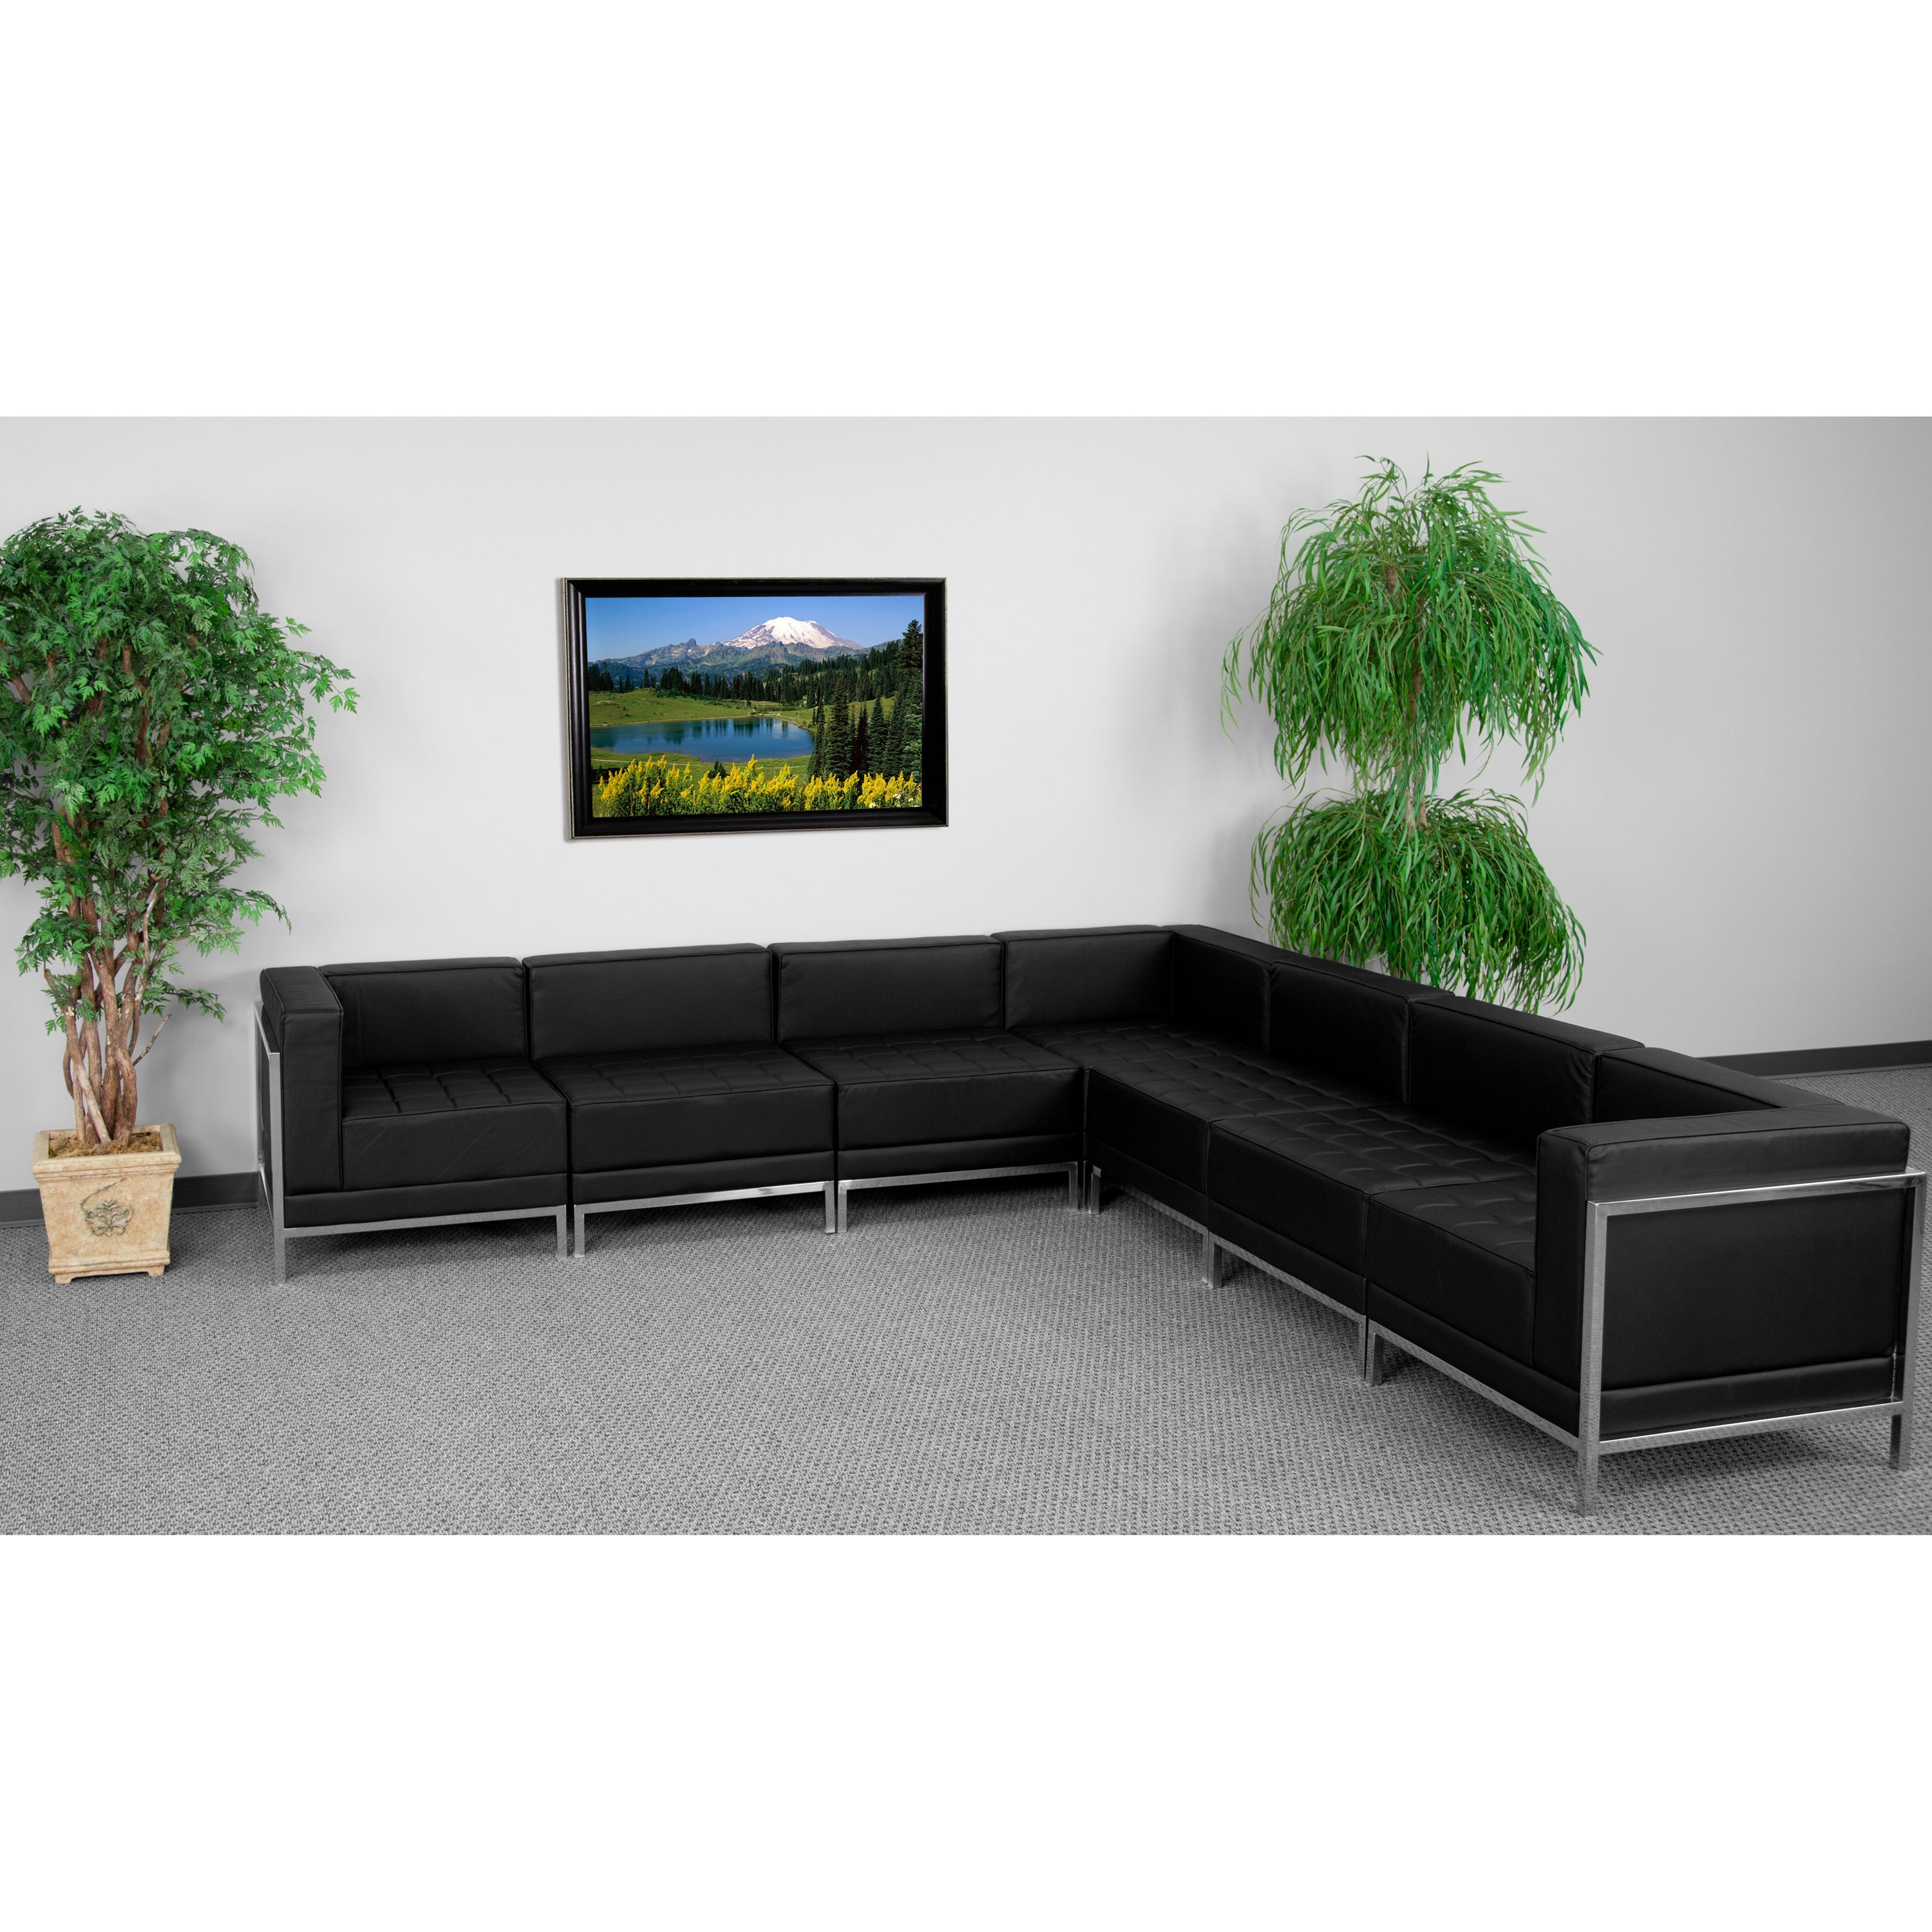 HERCULES Imagination Series LeatherSoft Sectional Configuration, 7 Pieces-Modular Reception Set-Flash Furniture-Wall2Wall Furnishings